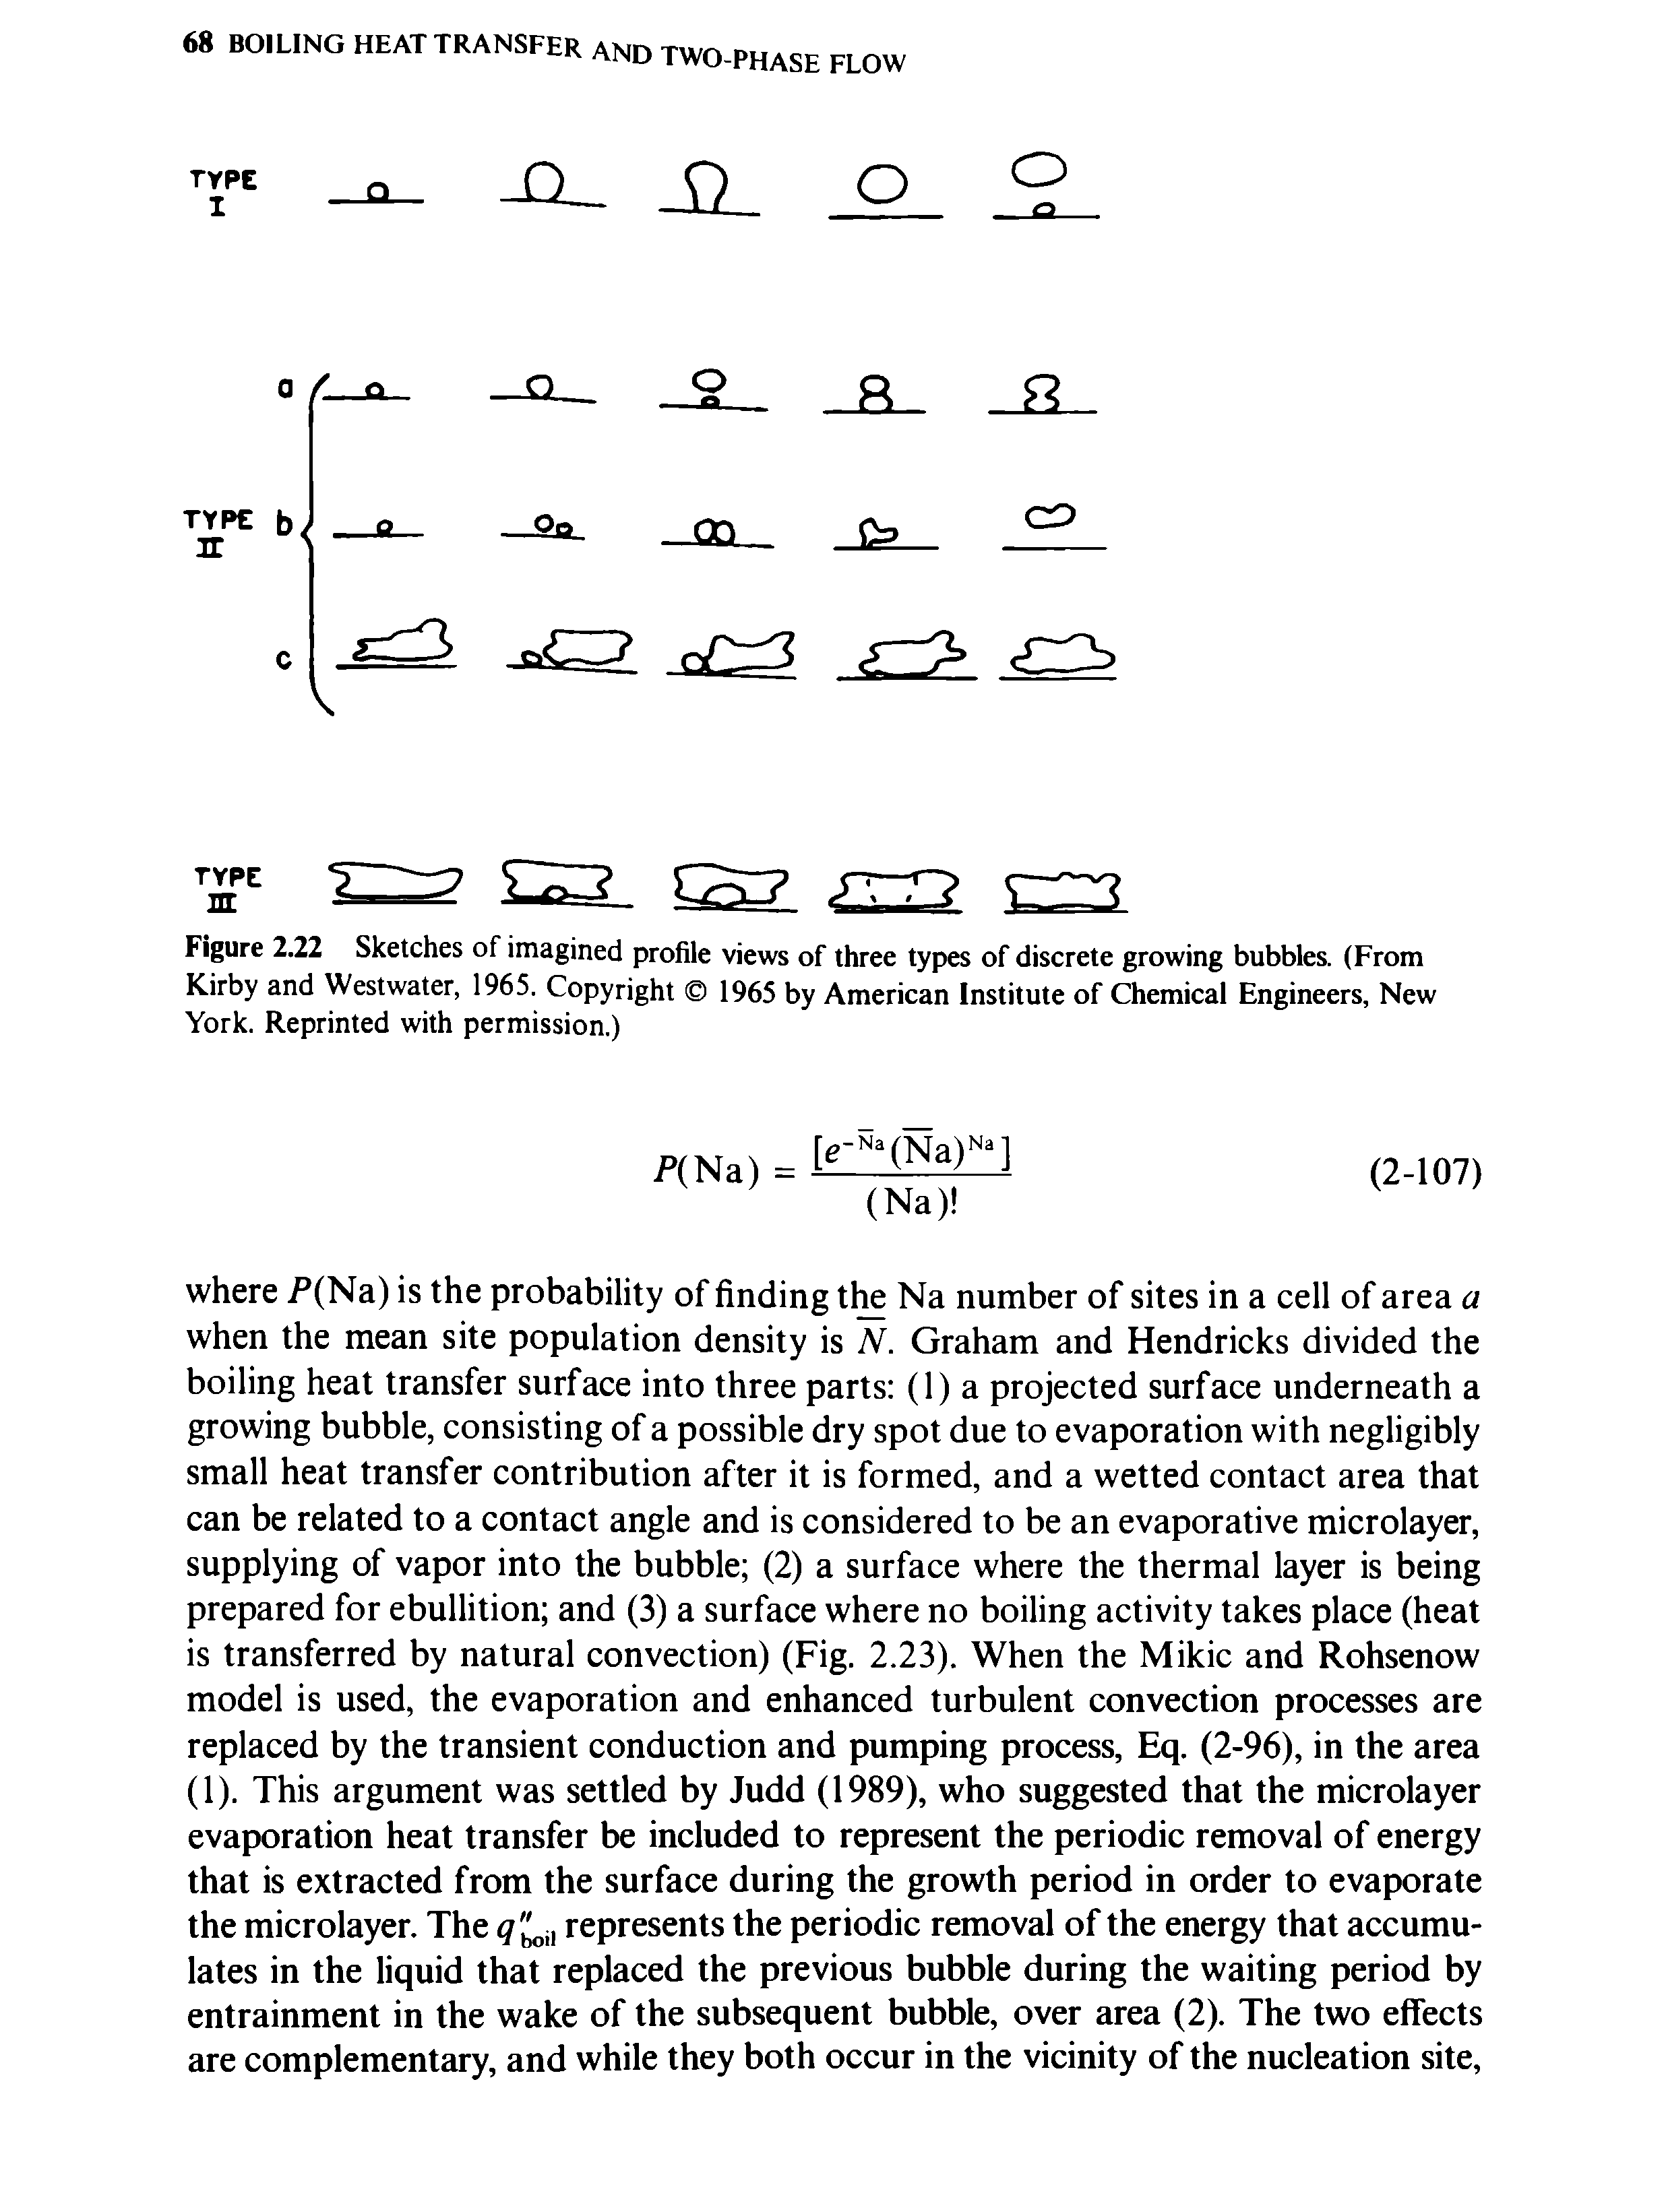 Figure 2.22 Sketches of imagined profile views of three types of discrete growing bubbles. (From Kirby and Westwater, 1965. Copyright 1965 by American Institute of Chemical Engineers, New York. Reprinted with permission.)...